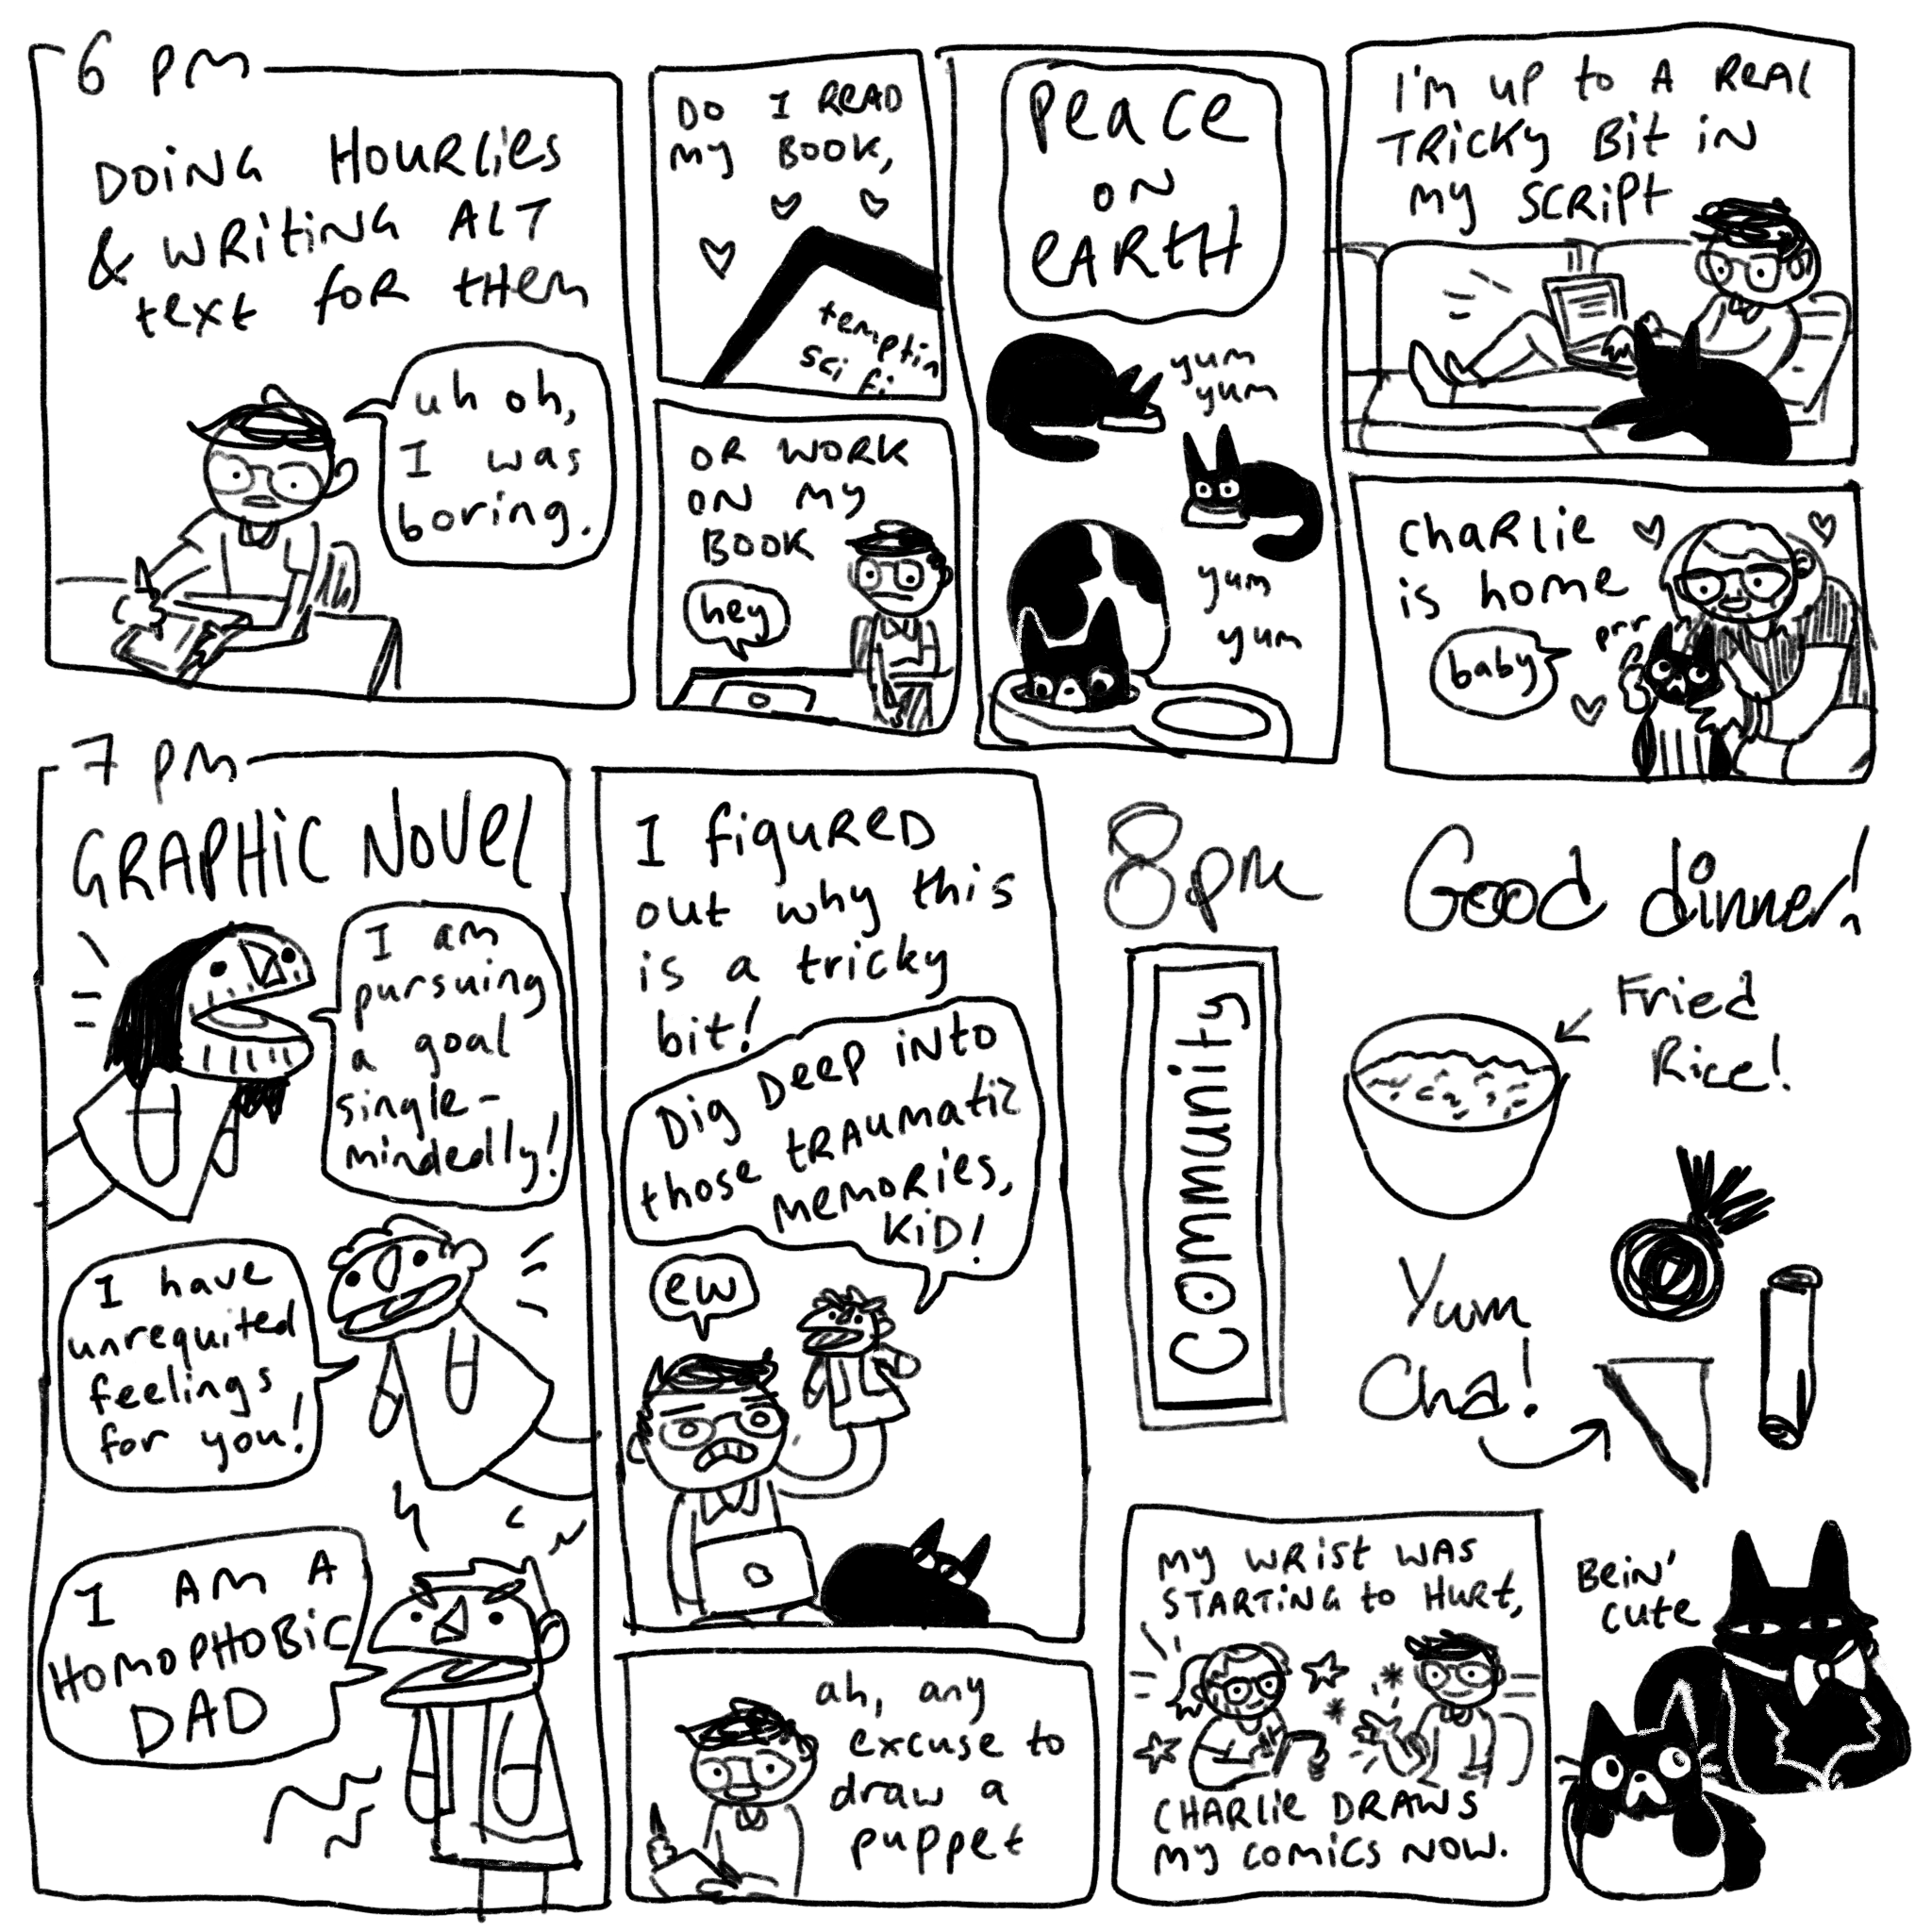 6 pm: doing hourlies and writing alt text for them. A picture of me drawing and saying “uh oh, I was boring,” Do I read my book? (Kindle screen reads “tempting sci fi”) or work on my book? (I look apprehensively at my laptop, which says “hey”) Peace on earth: the three cats all eat. I sit on the couch with Gideon the cat. “I’m up to a real tricky bit I’m my script.” Charlie is home. He pats a purring Peony and says “baby.” 7 pm: graphic novel! Three puppets say, “I am pursuing a goal single-mindedly!” “I have unrequited feelings for you!” And “I am a homophobic dad!” I hold up the last puppet and say “I figured out why this is a tricky bit!” The bad dad puppet in my hand says, “dig deep into those traumatic memories, kid!” As I say “ew.” As I draw the panel beforehand I say “ah, any excuse to draw a puppet.” 8 pm: good dinner! Community, yum cha, and fried rice! These are all drawn by a different person. Below, I say “my wrist was starting to hurt. Charlie draws my comics now.”